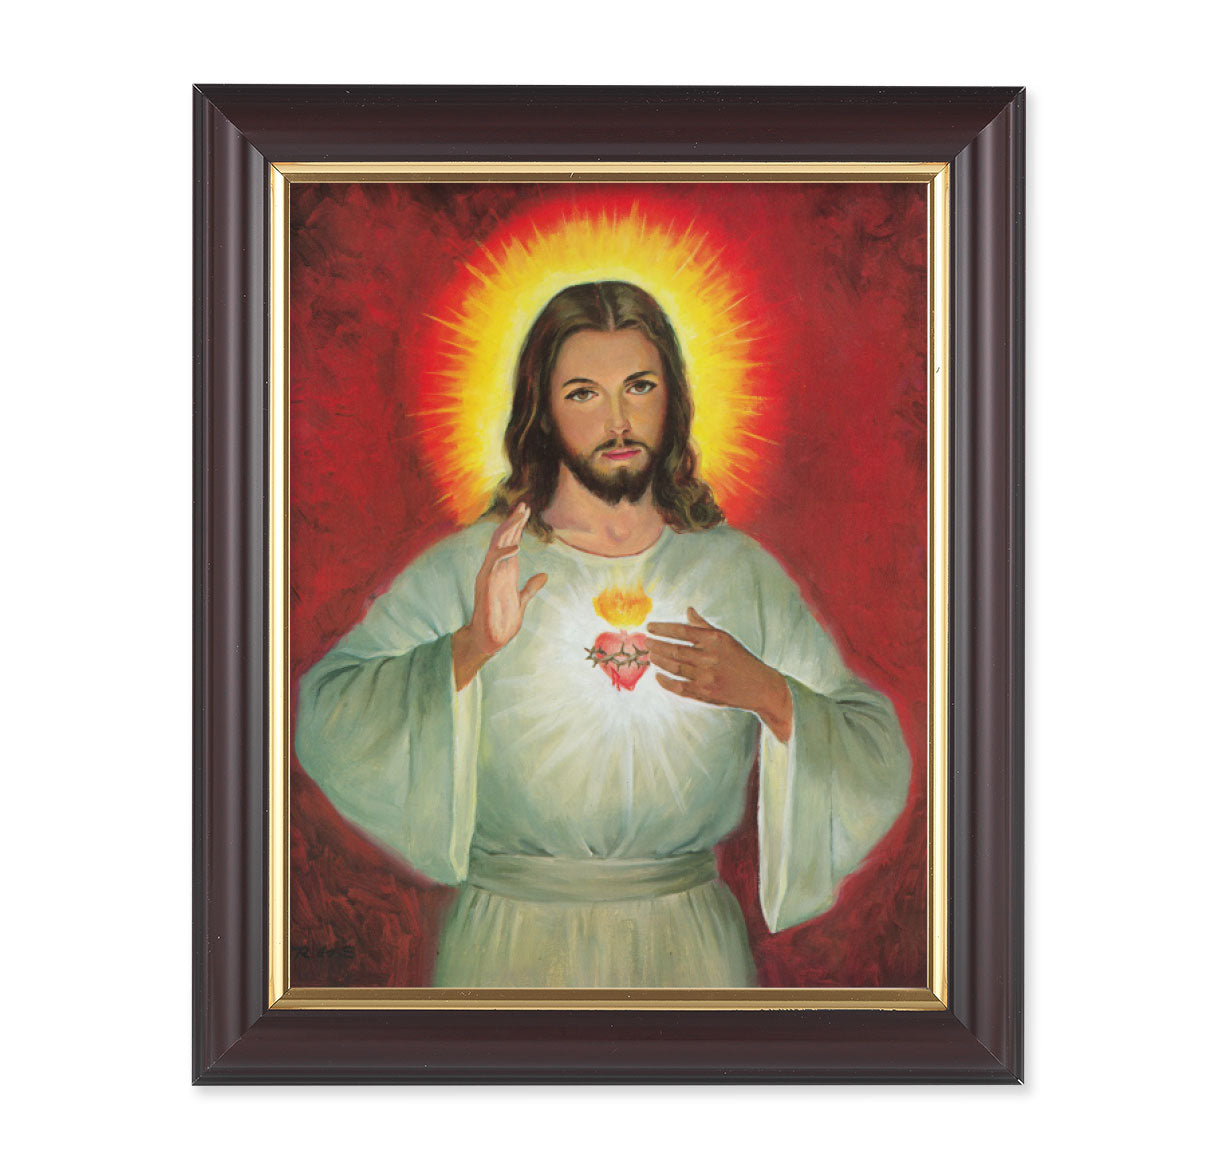 Sacred Heart Picture Framed Wall Art Decor Medium, Classic Fluted Dark Walnut Finished Frame with Gold-Leaf Lip